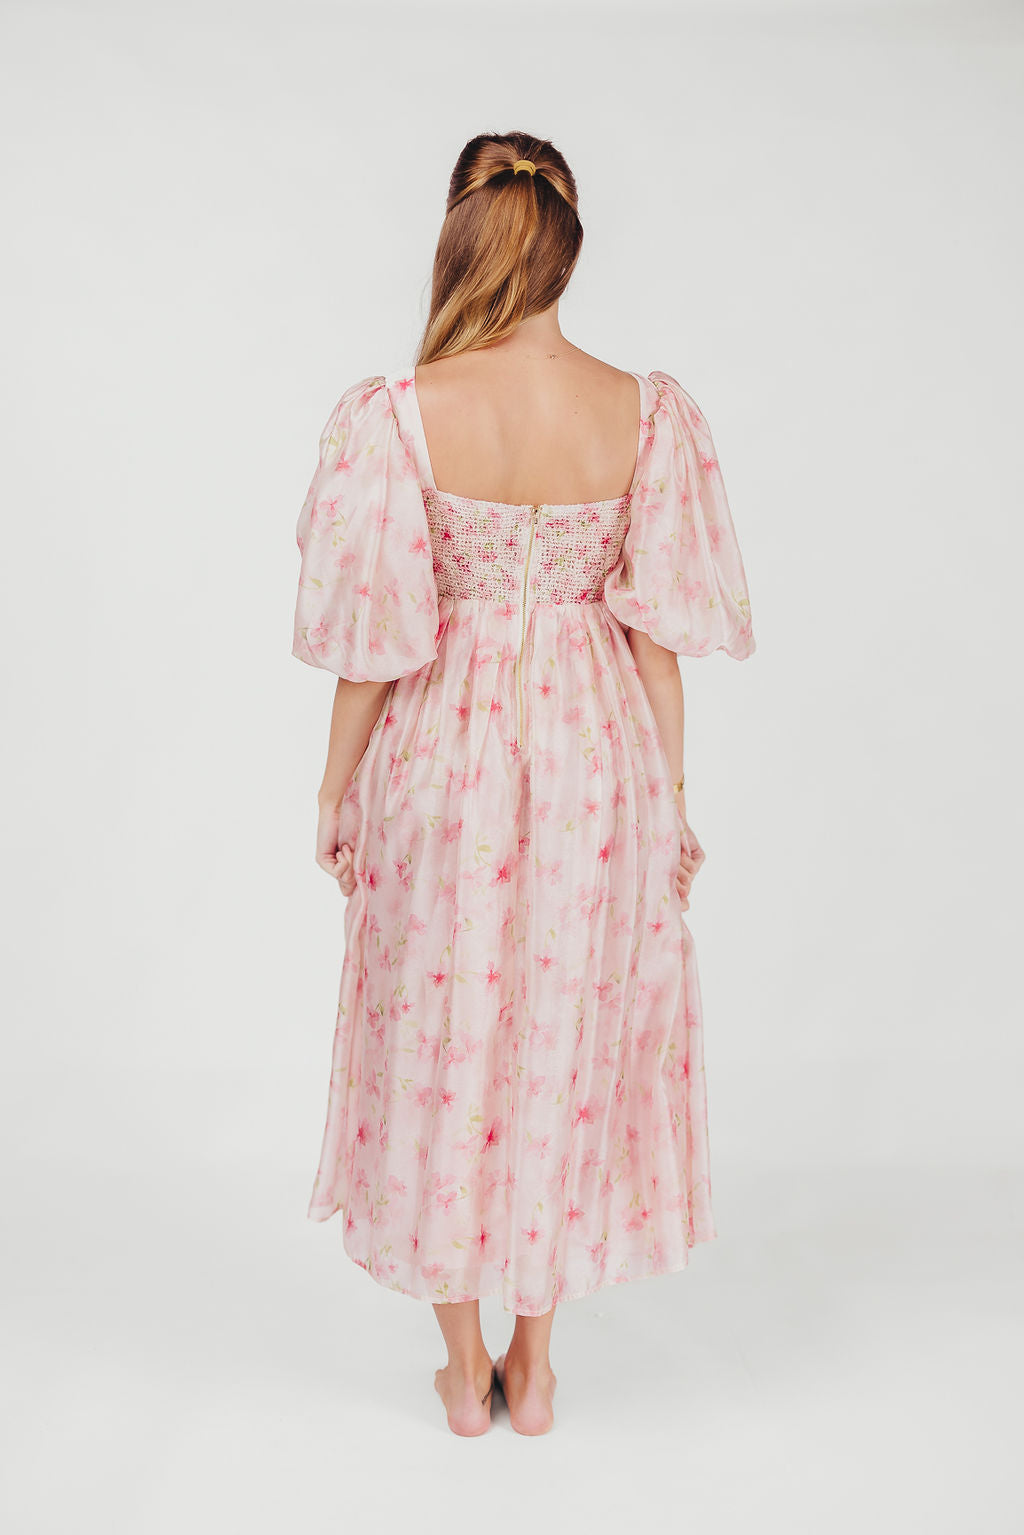 Harlow Maxi Dress in Pink - Bump Friendly & Inclusive Sizing (S-3XL)